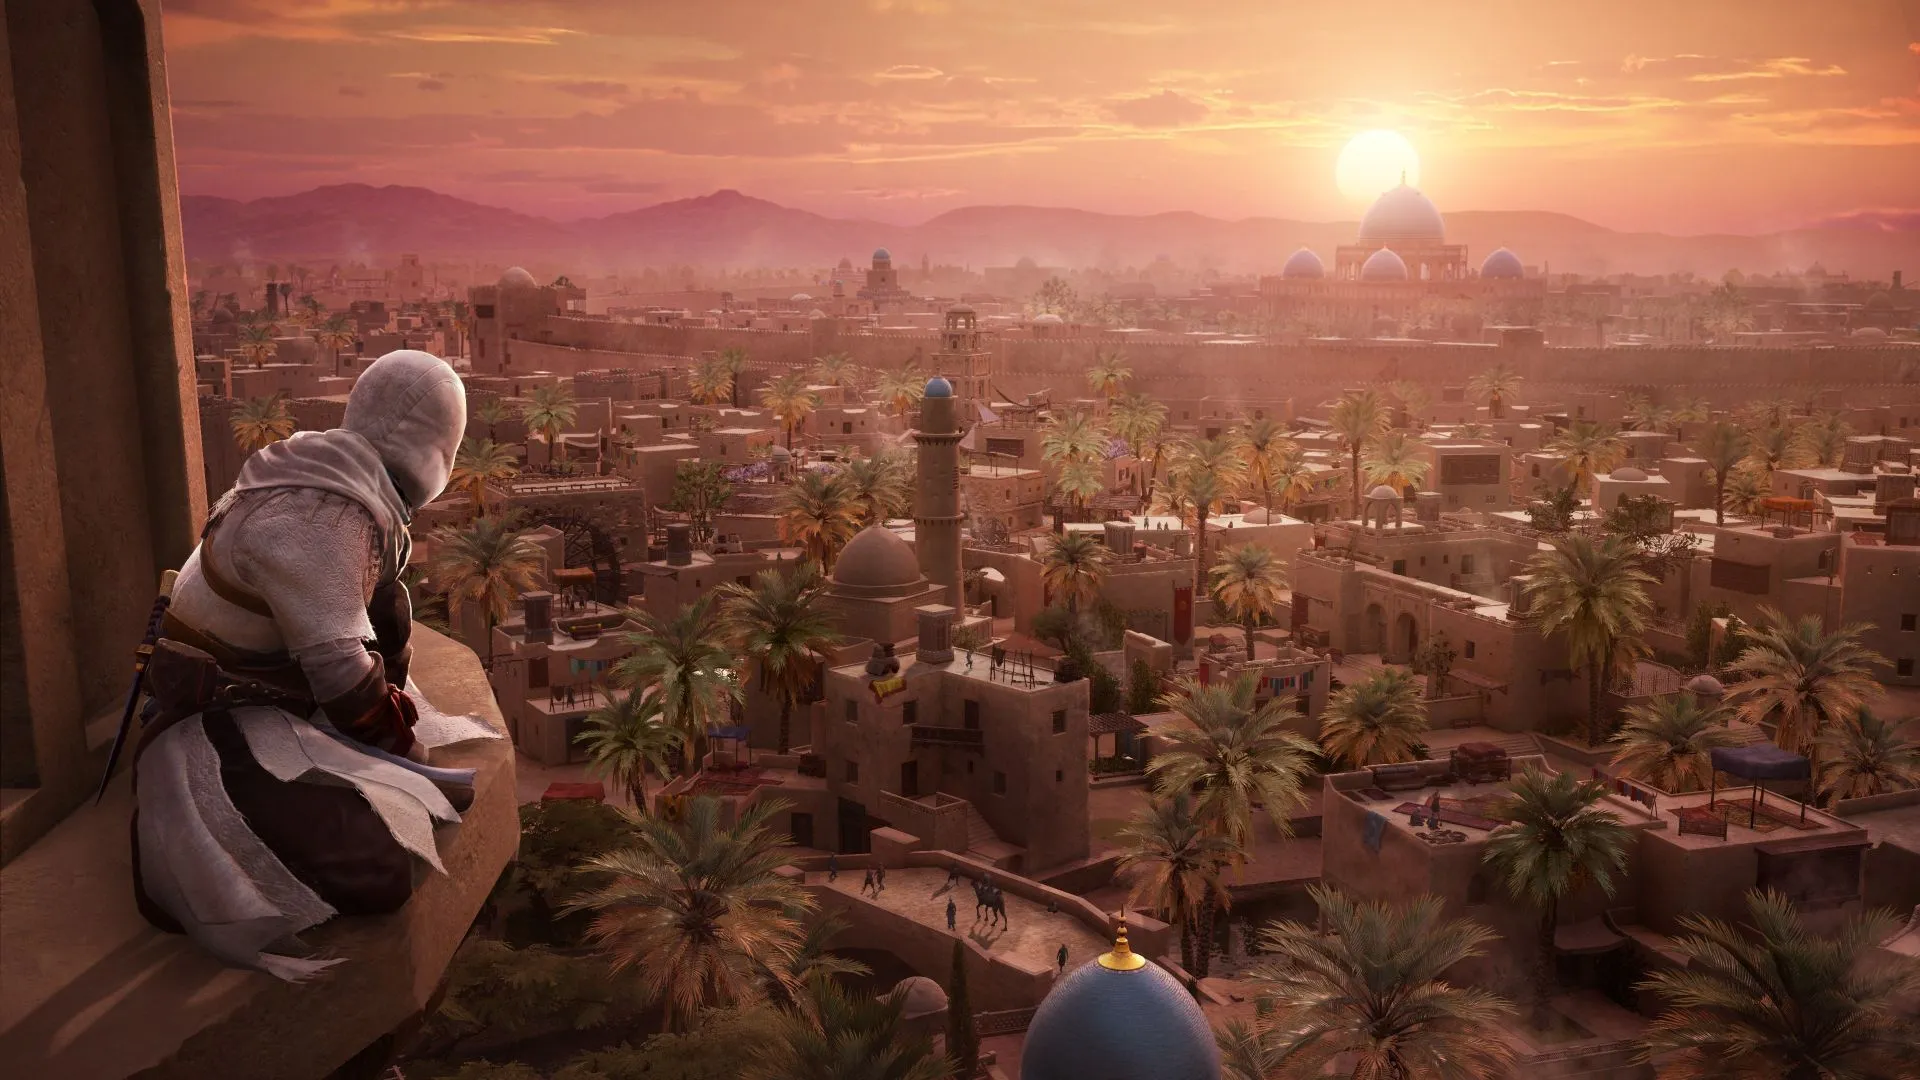 Assassin's Creed Mirage PC System Requirements Revealed